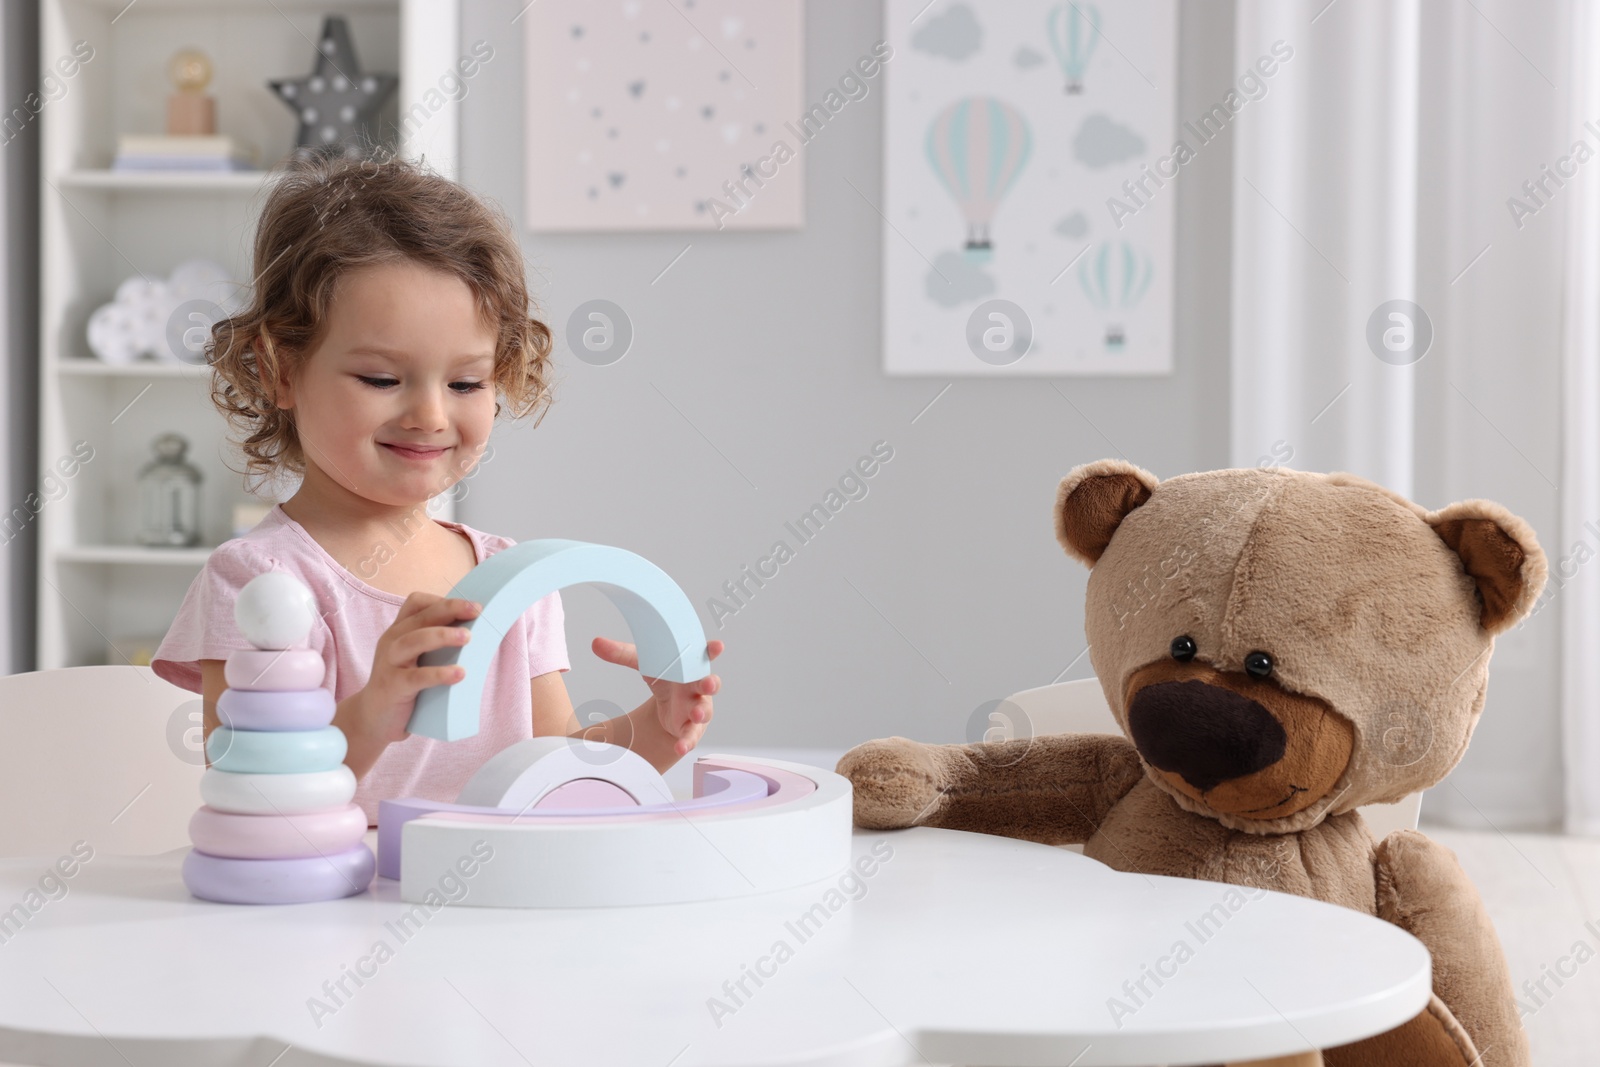 Photo of Cute little girl playing with toy and teddy bear at white table in room